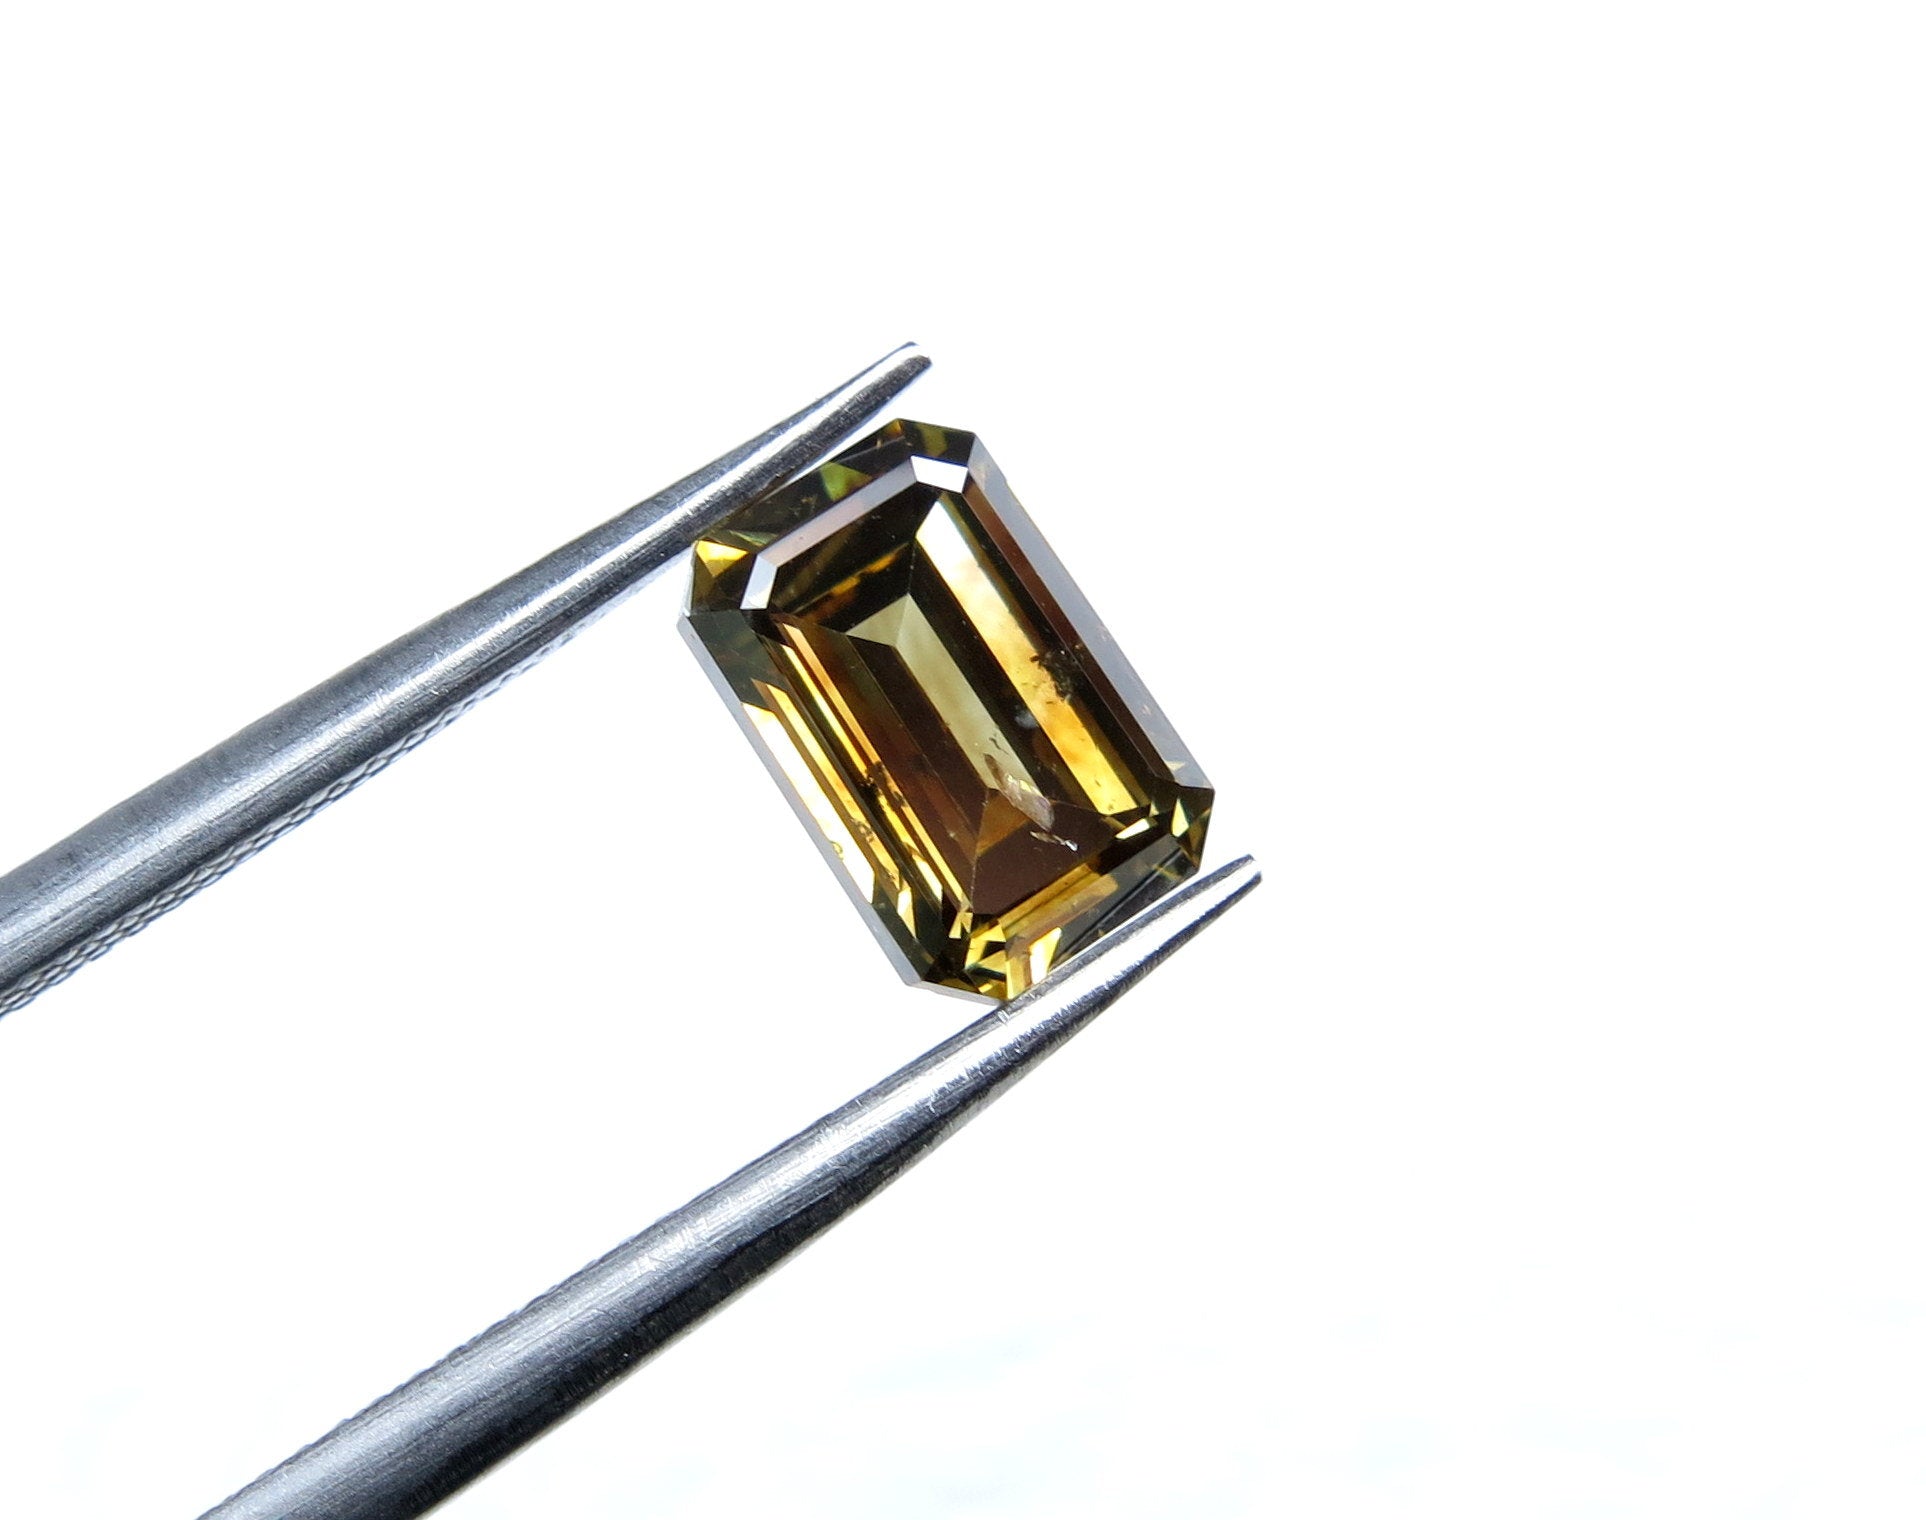 Natural Loose Diamond Emerald Fancy Deep Yellow Brown SI1 Clarity 6.90 MM 0.98 Ct